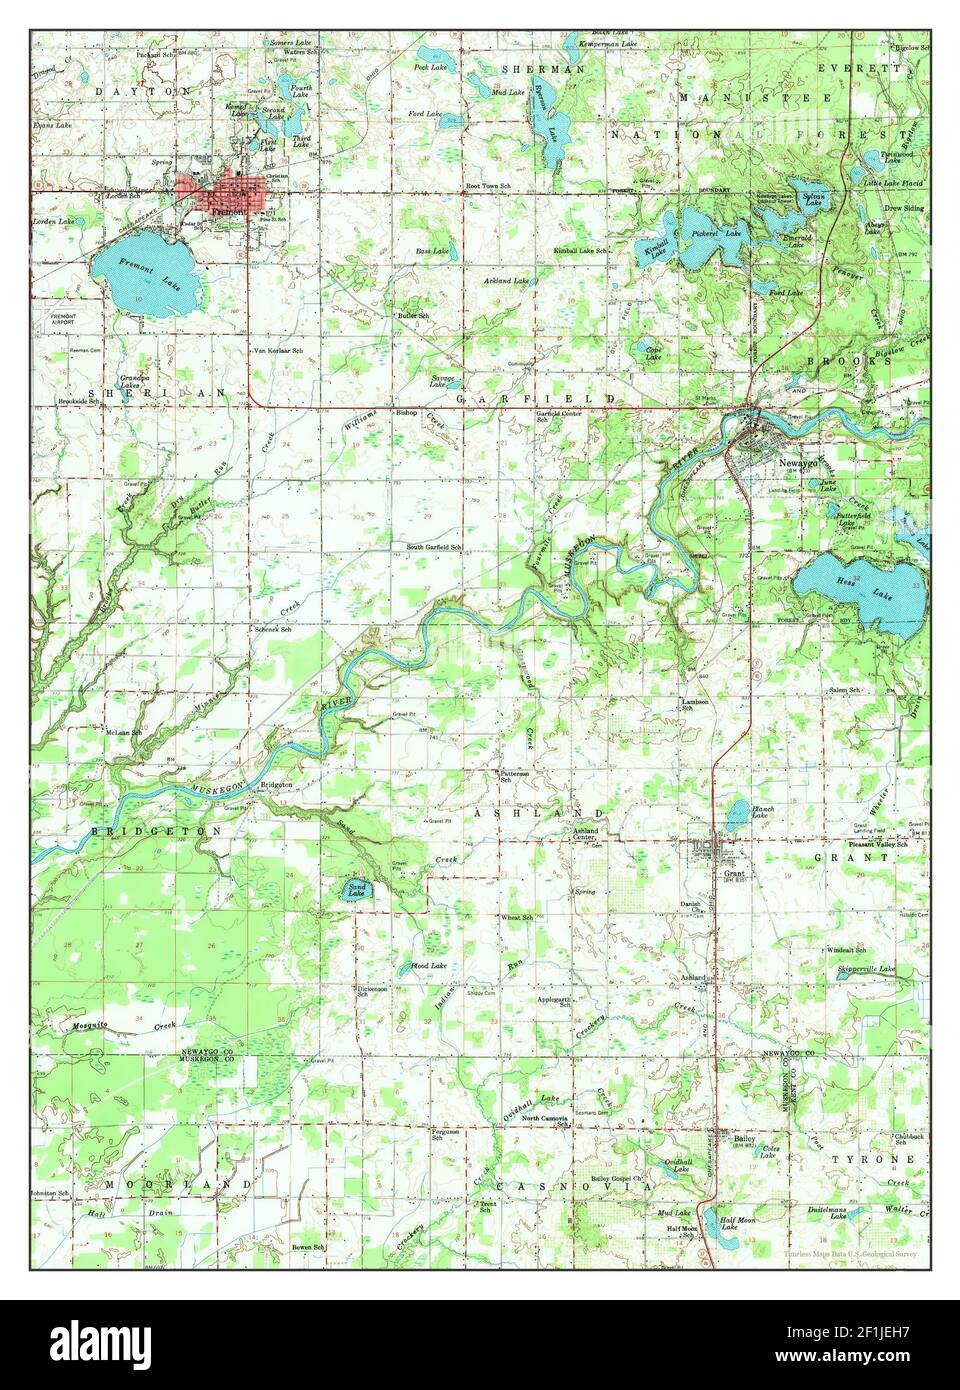 Fremont Michigan Map 1958 162500 United States Of America By Timeless Maps Data Us Geological Survey 2F1JEH7 